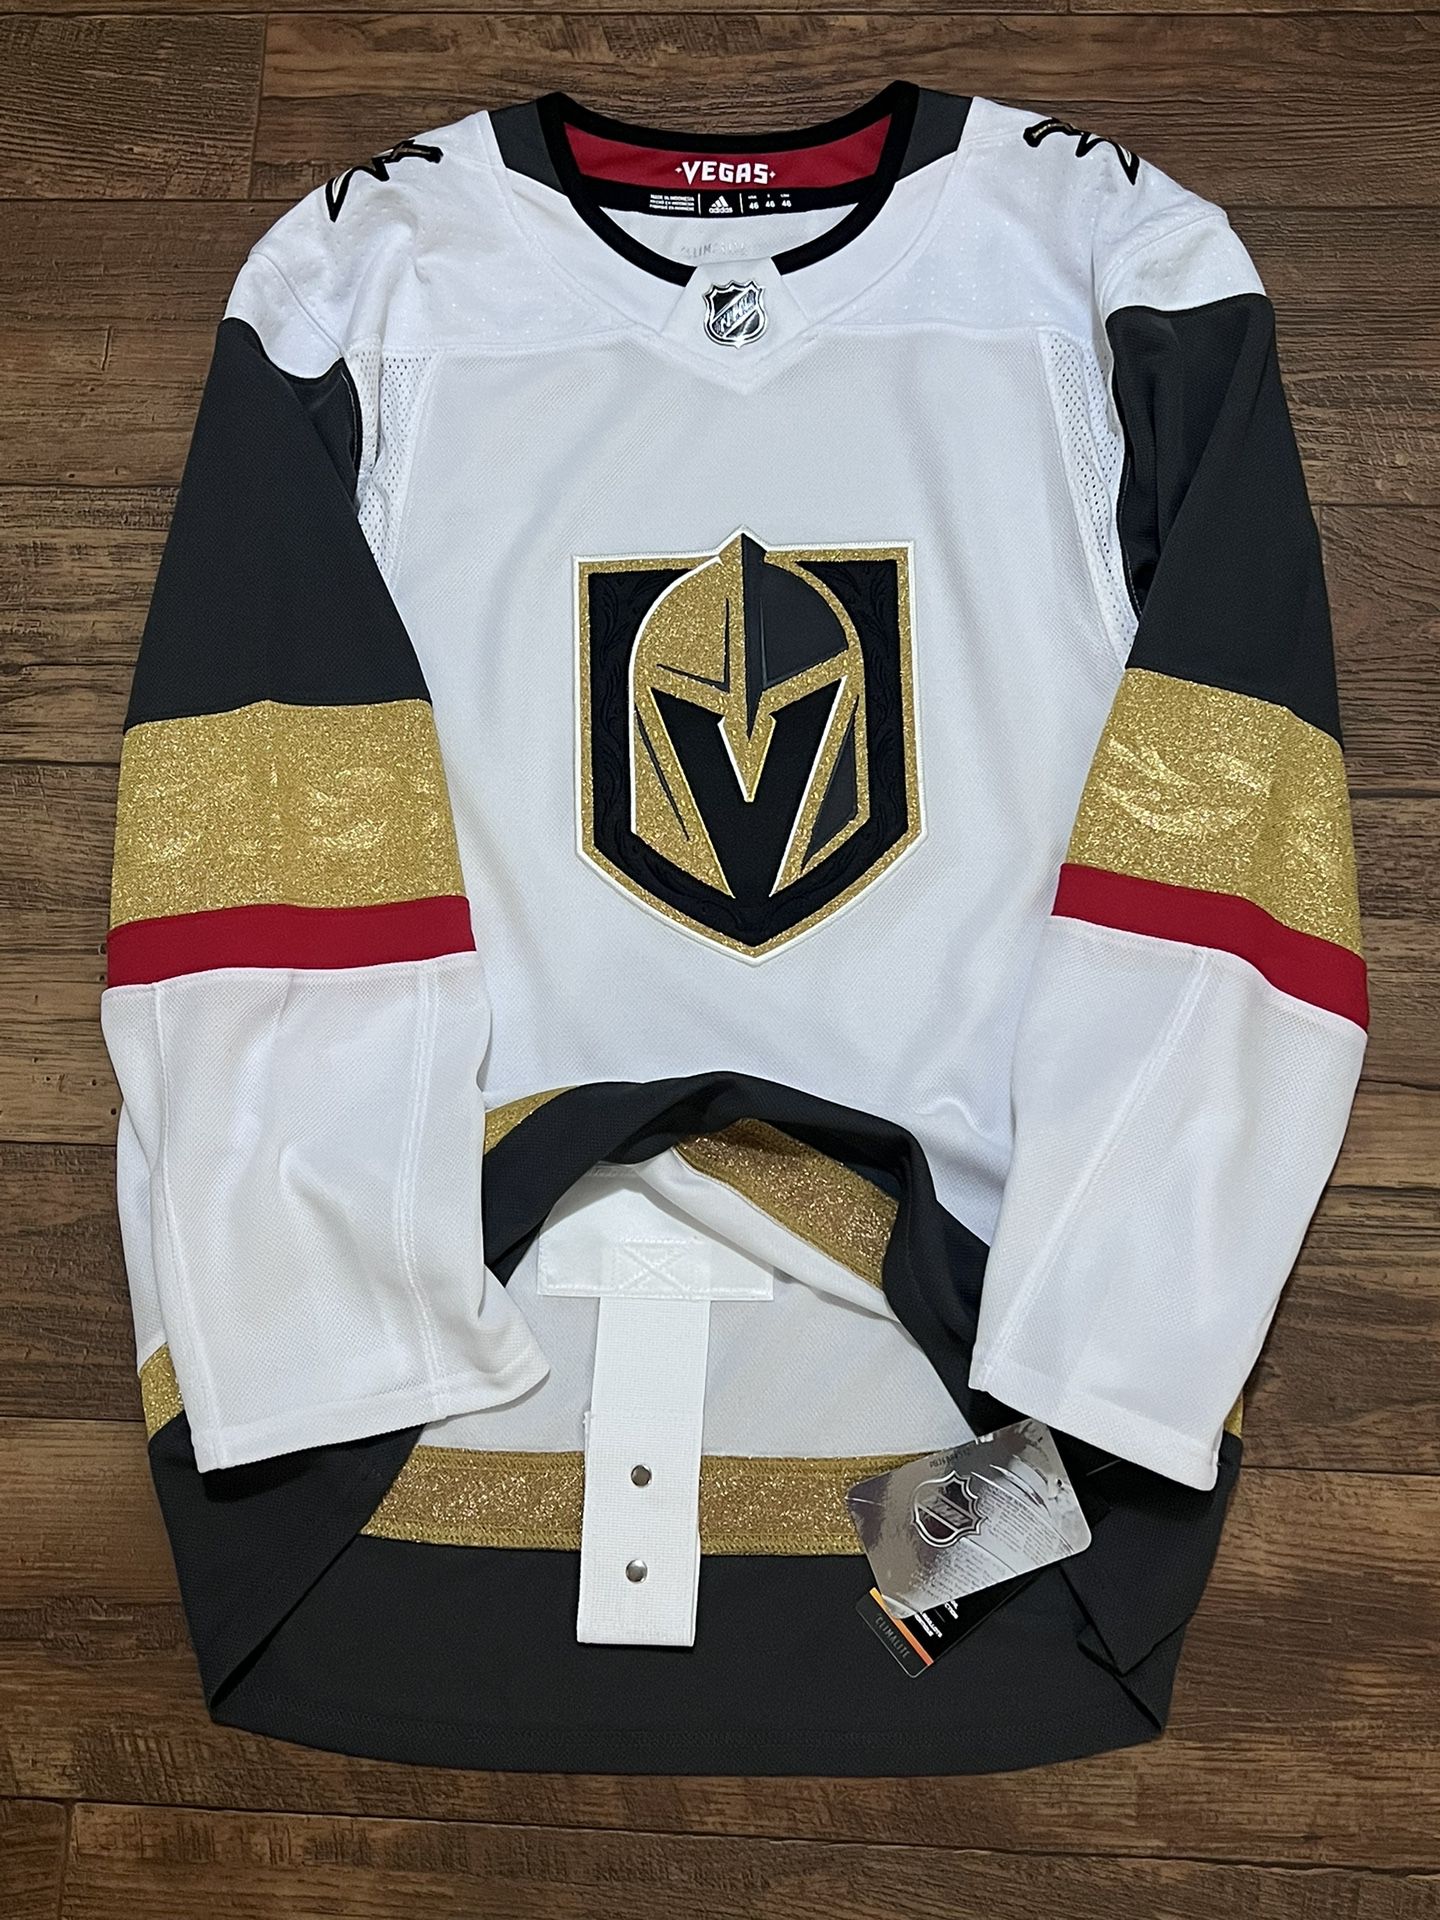 Vegas Golden Knights Adidas Authentic Jersey Size 46 / Small